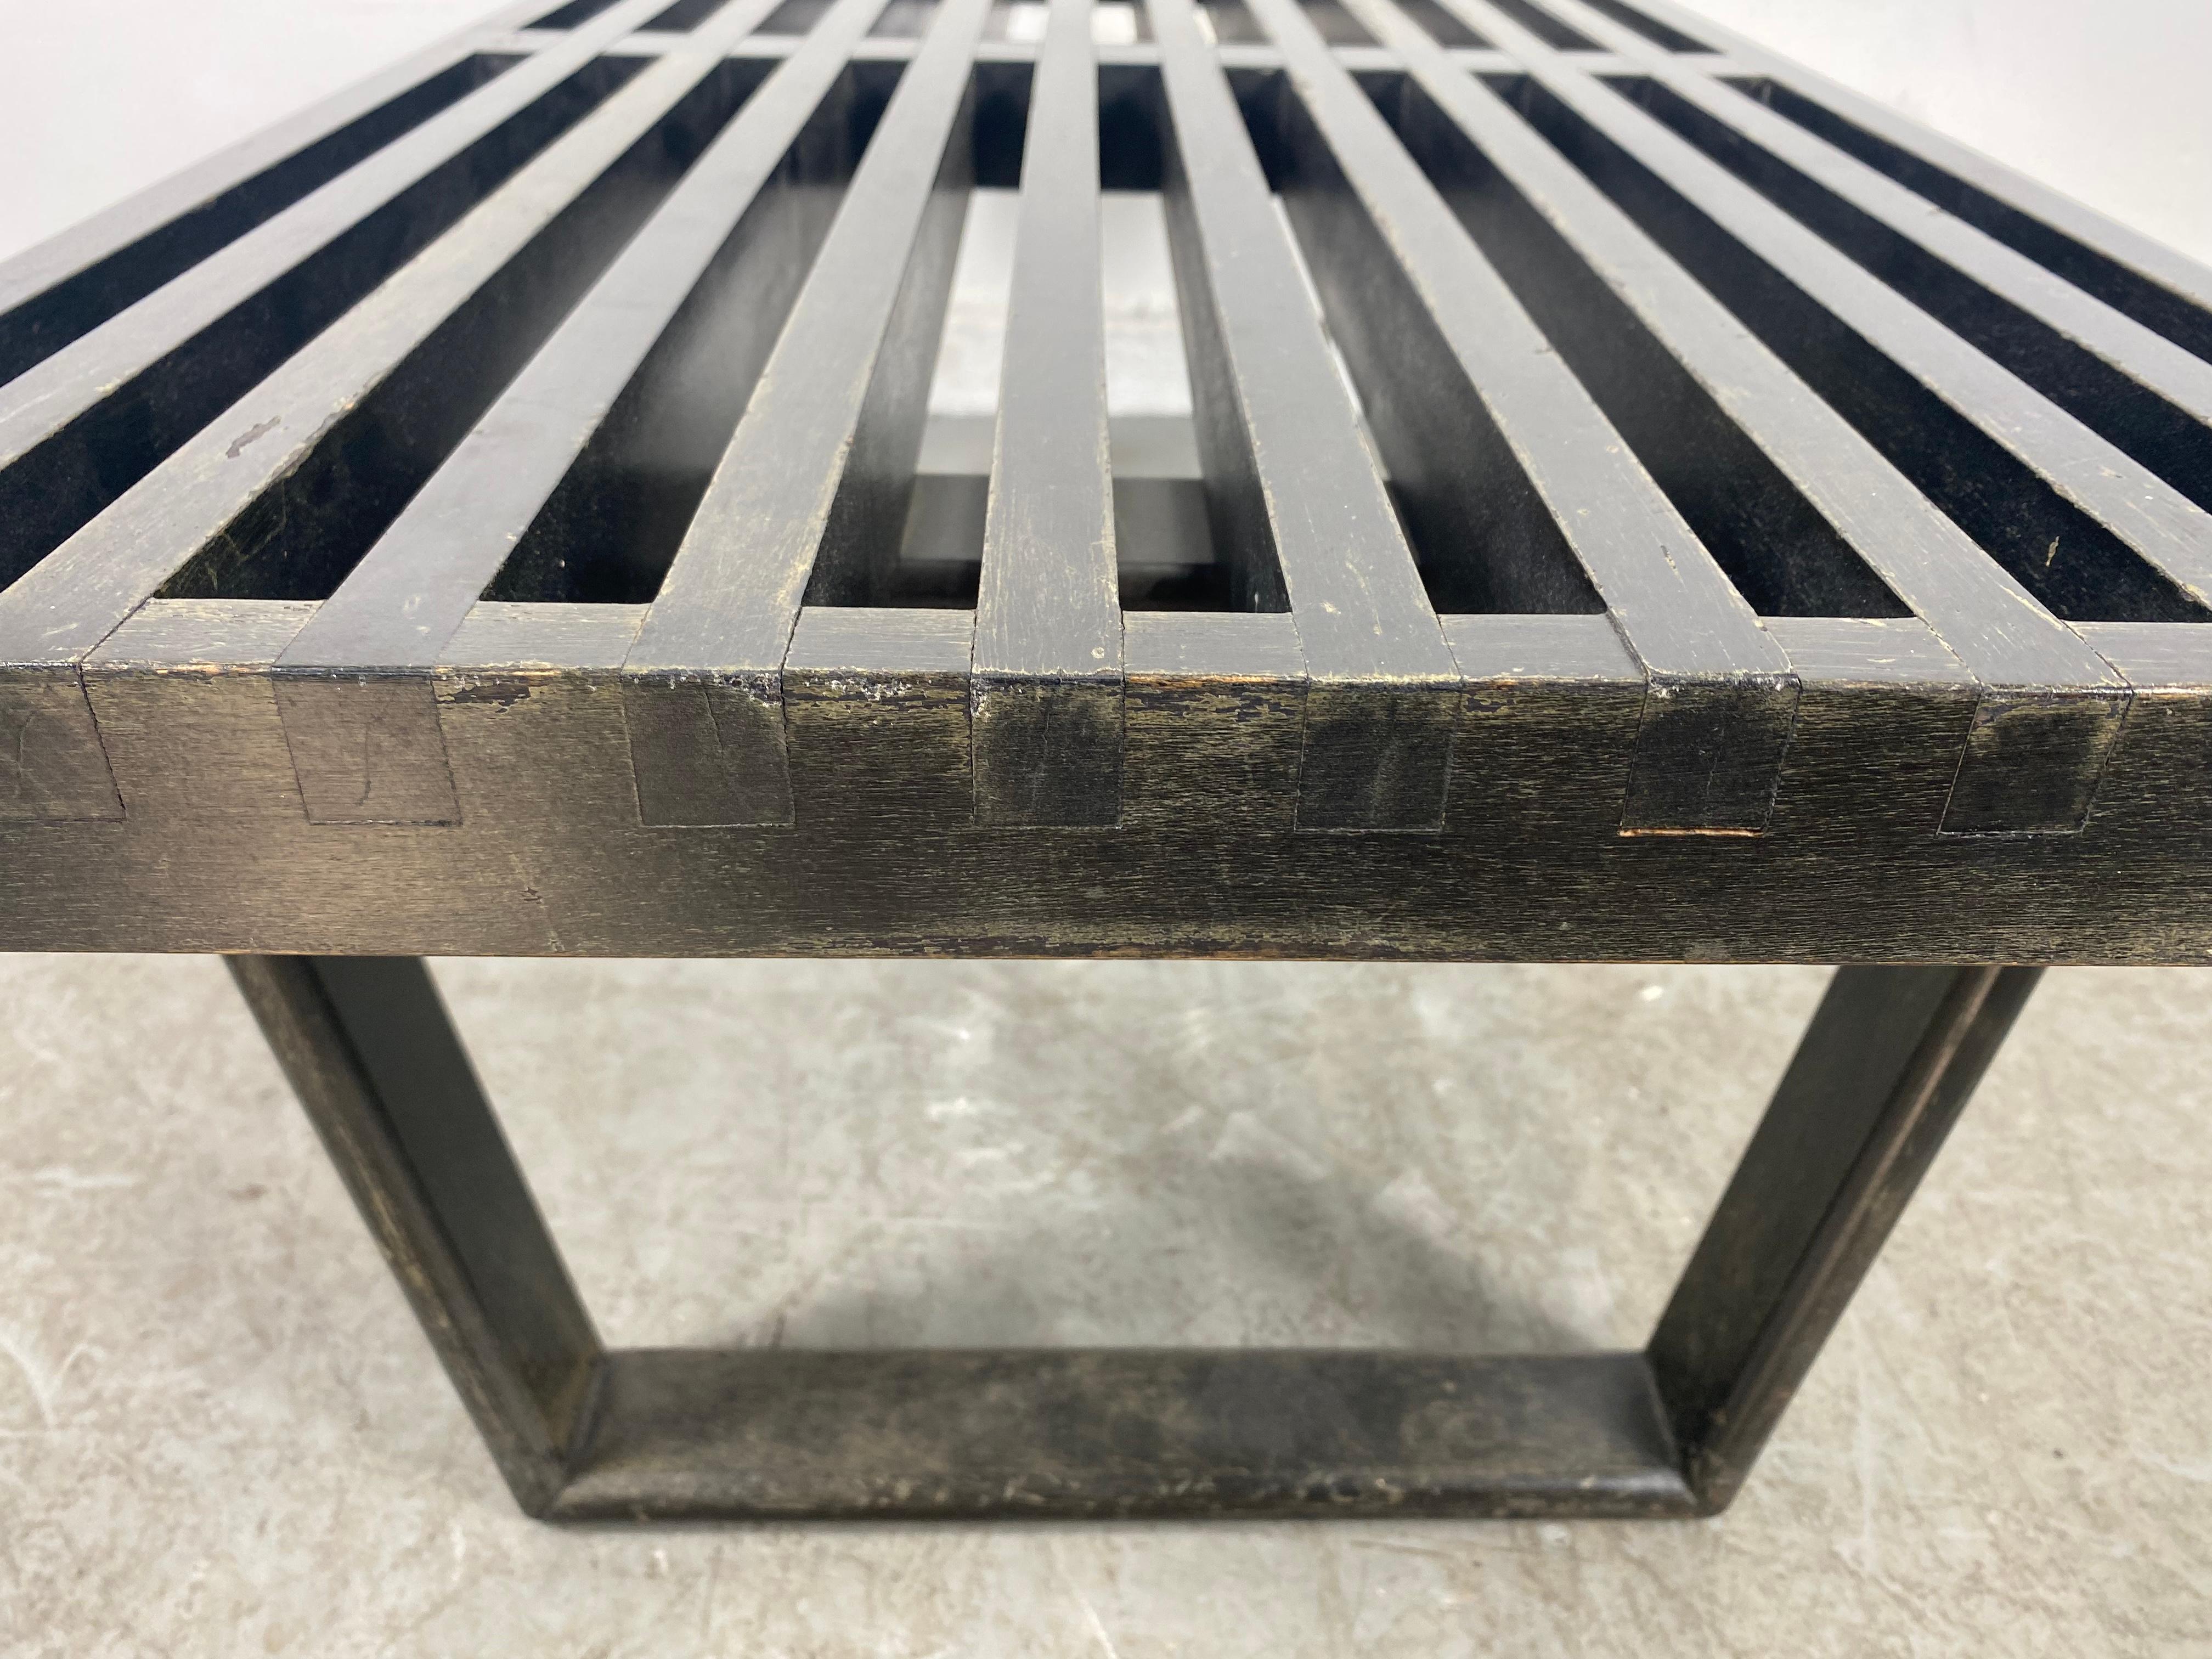 Extremely Rare and Early Ebonized Slat Bench, George Nelson / Herman Miller 1